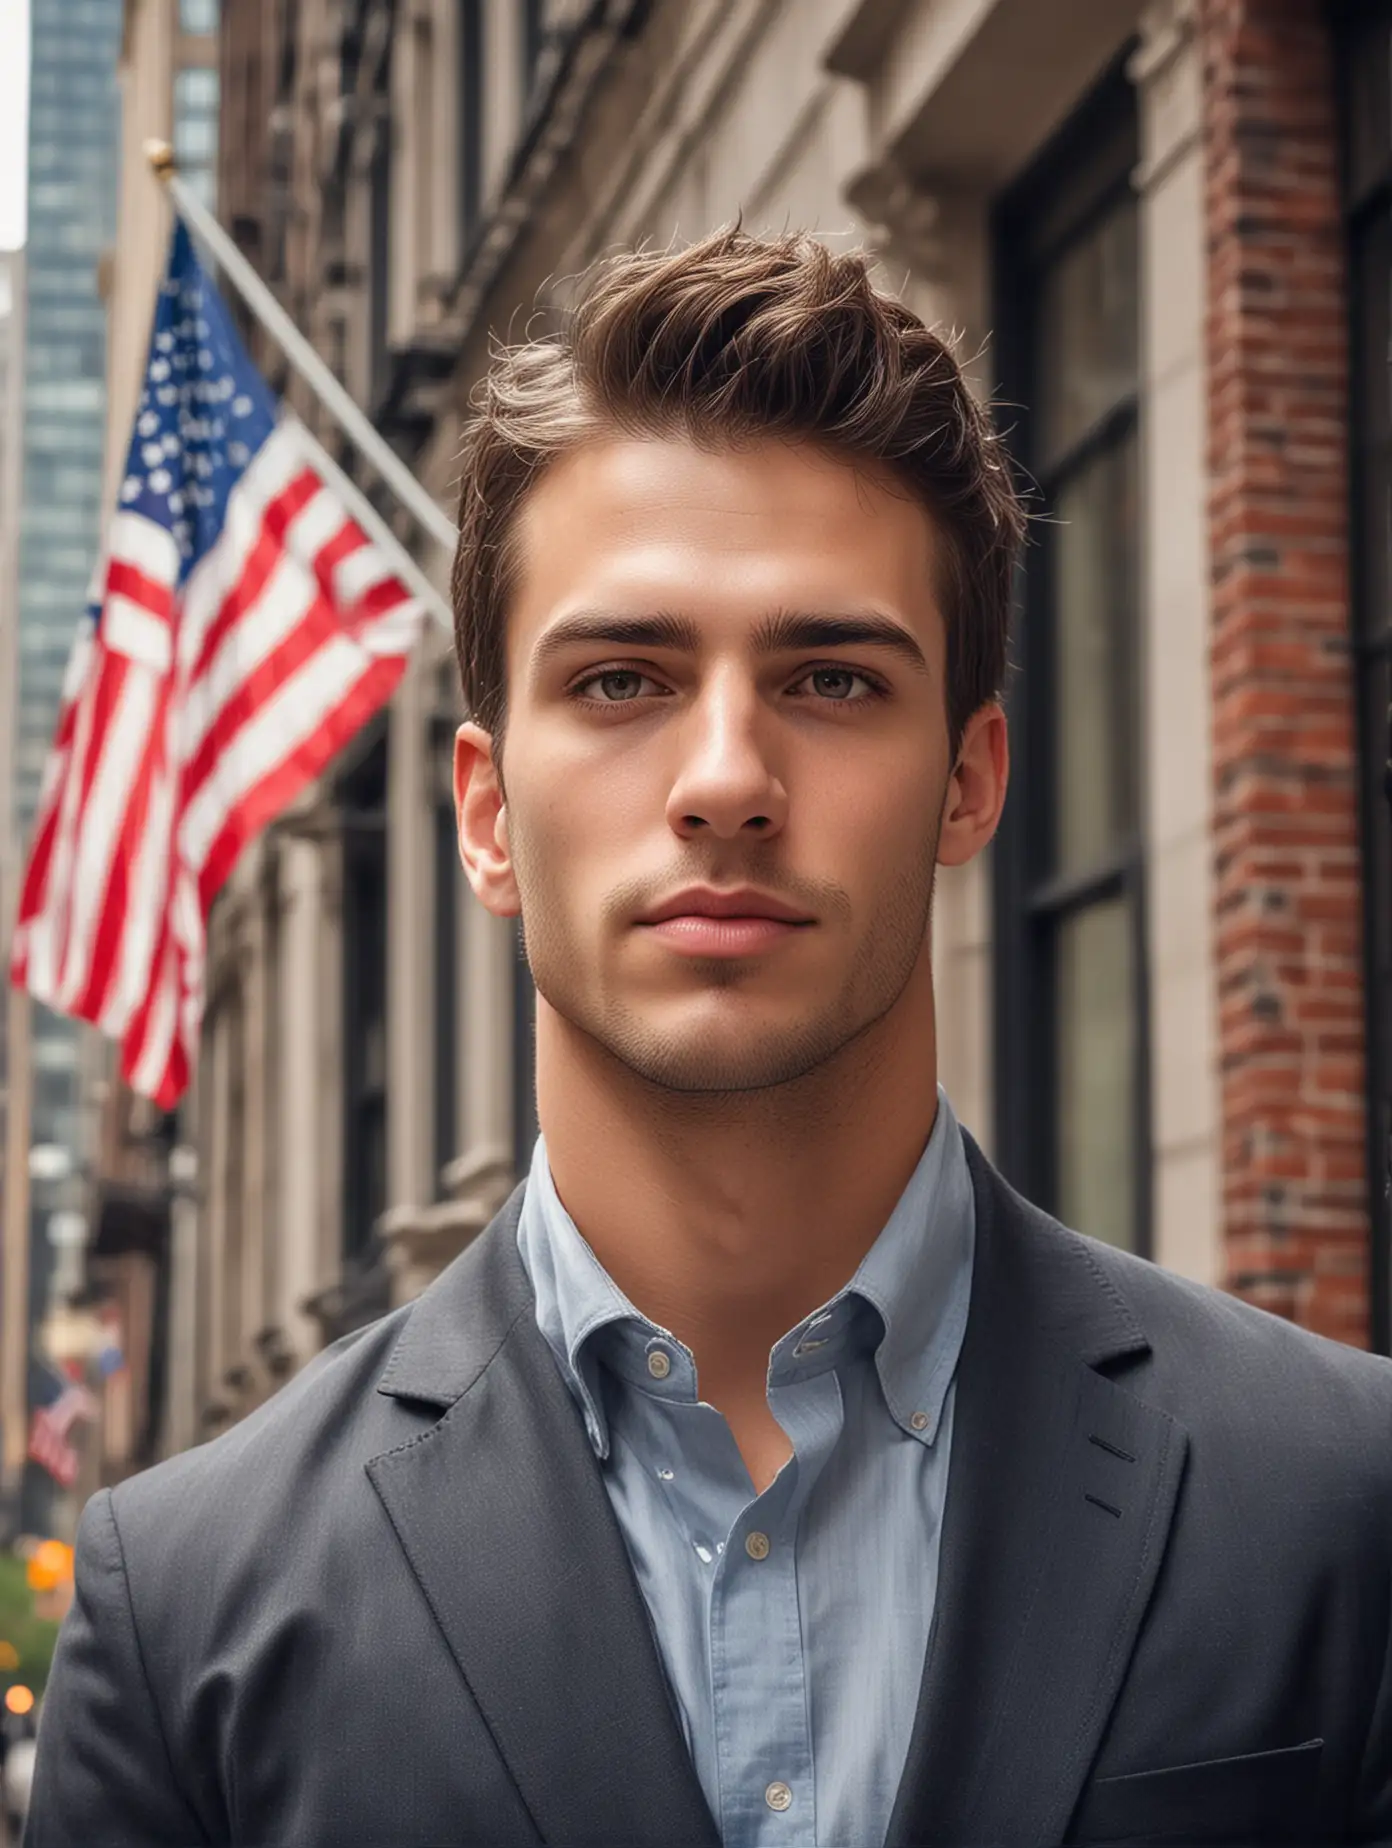 a handsome guy , American, New York buildings in the background，with exquisite facial features, the American flag as the background, professional photography technology, full body photo